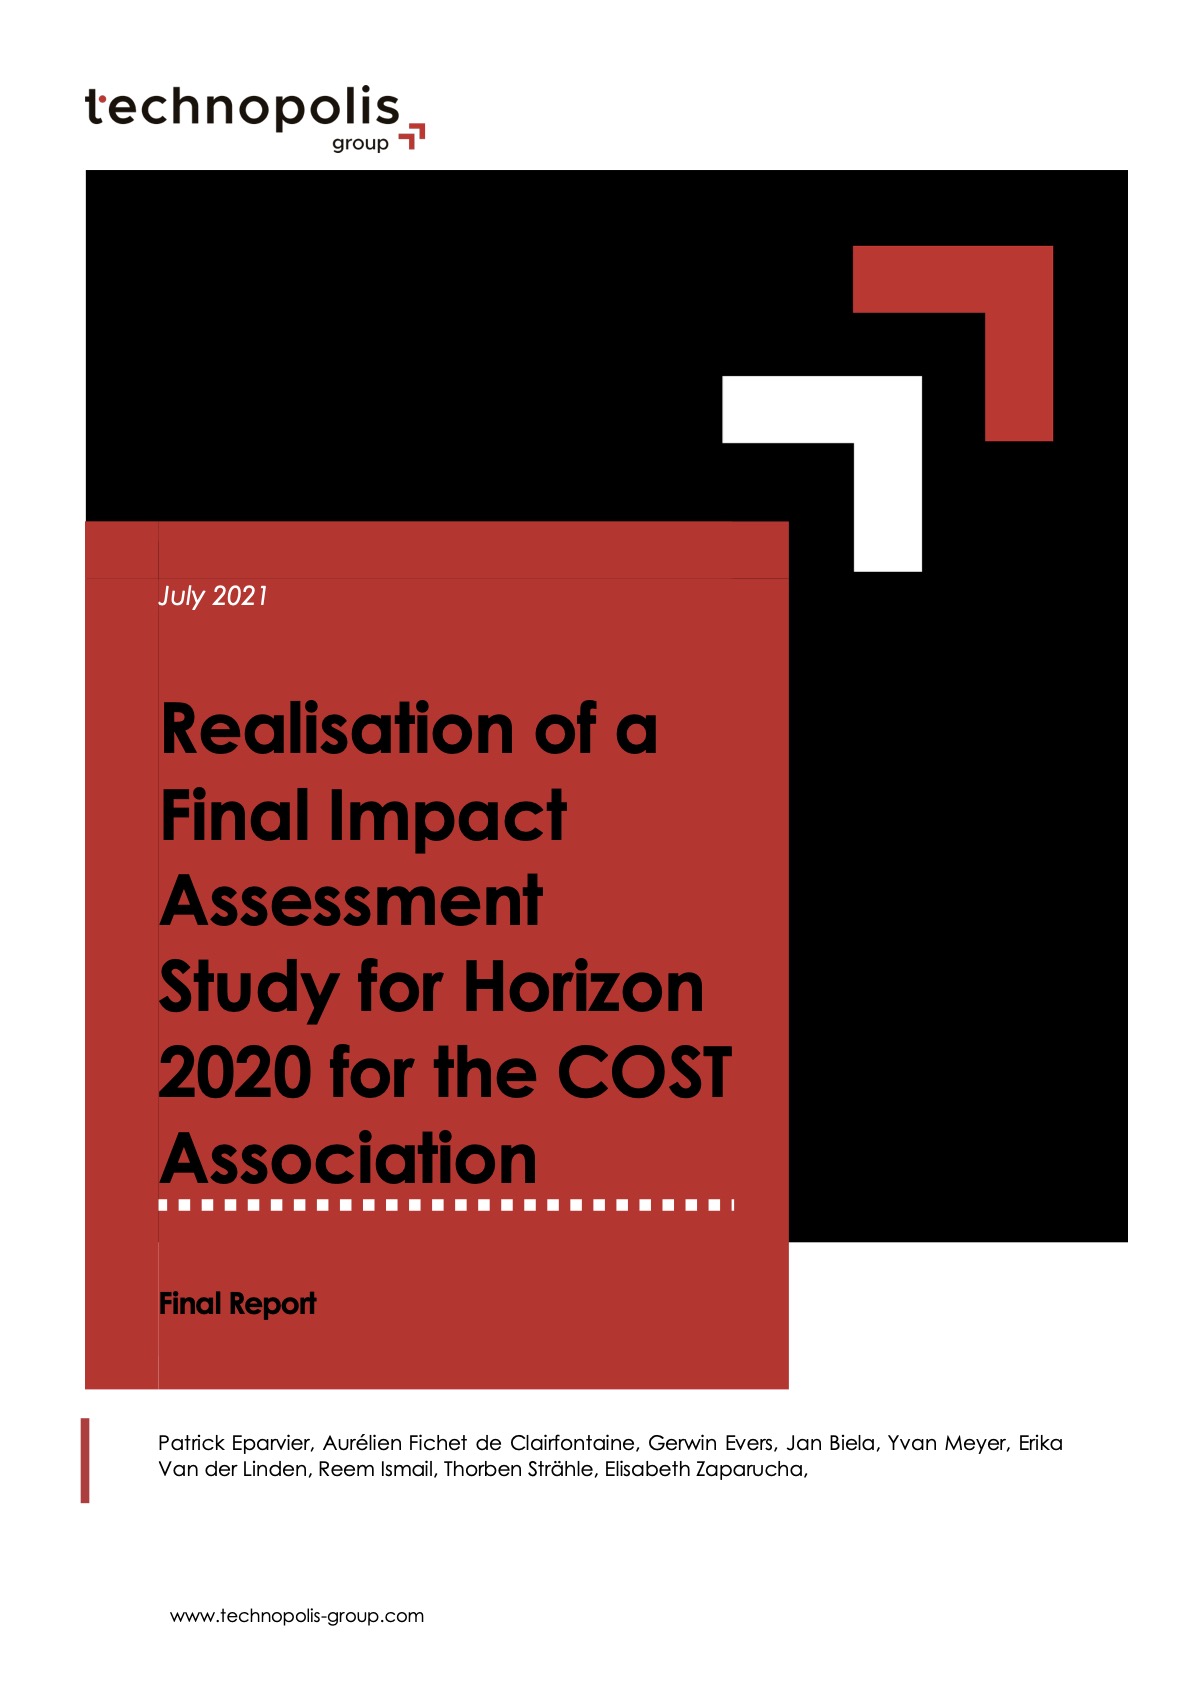 Study for Horizon 2020 for the COST Association